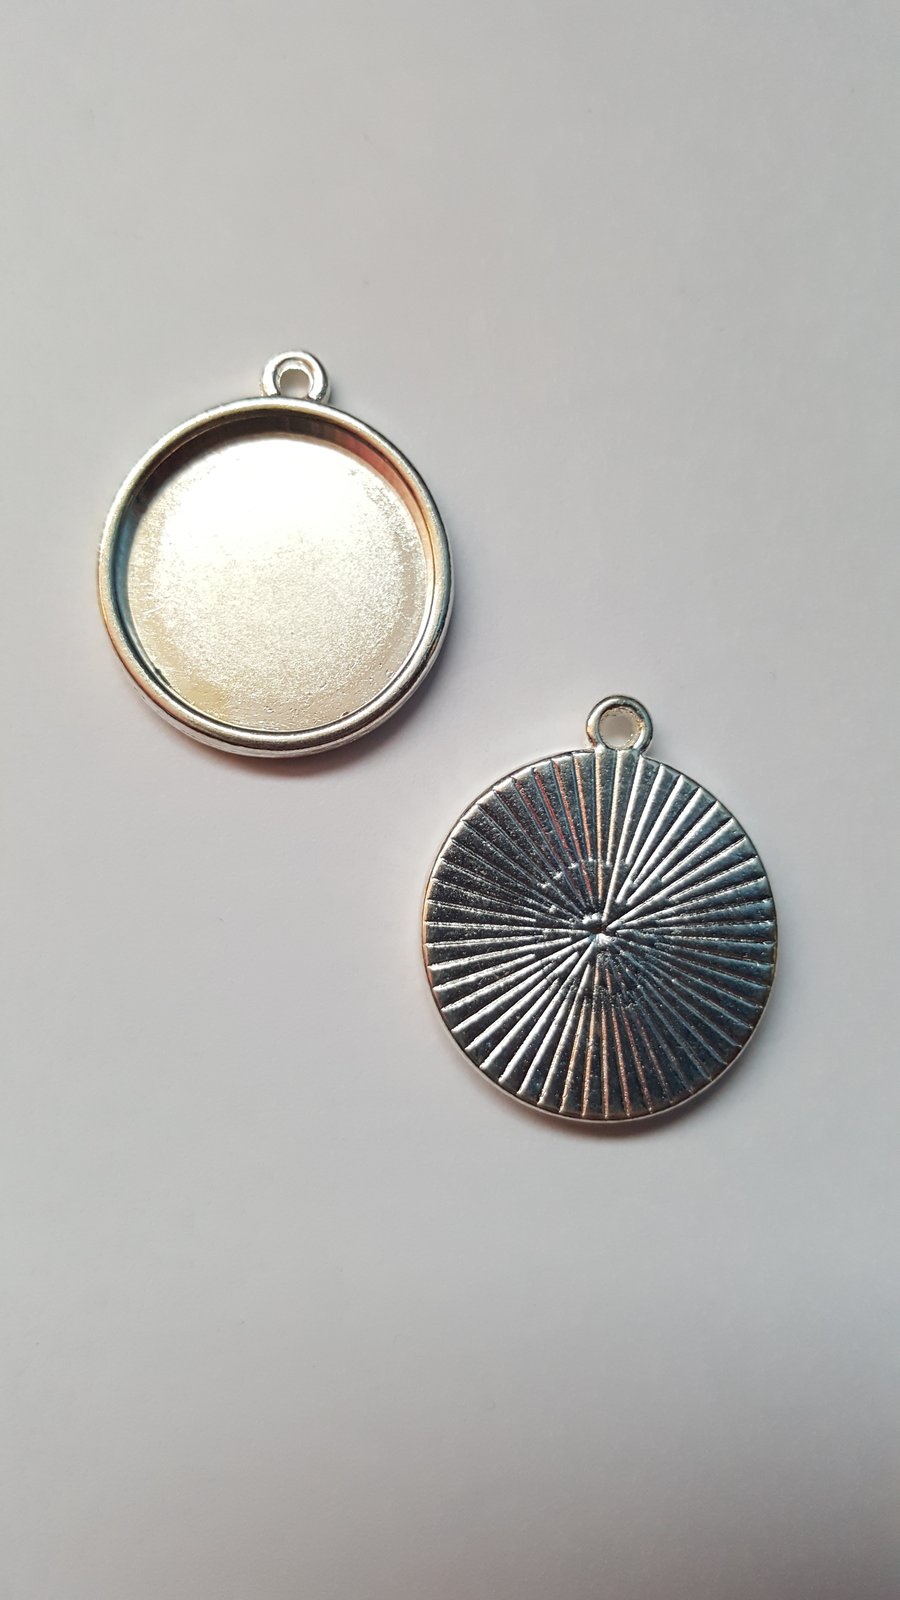 5 x Blank Cabochon Pendant Settings - 22mm - Round - Silver Plated 